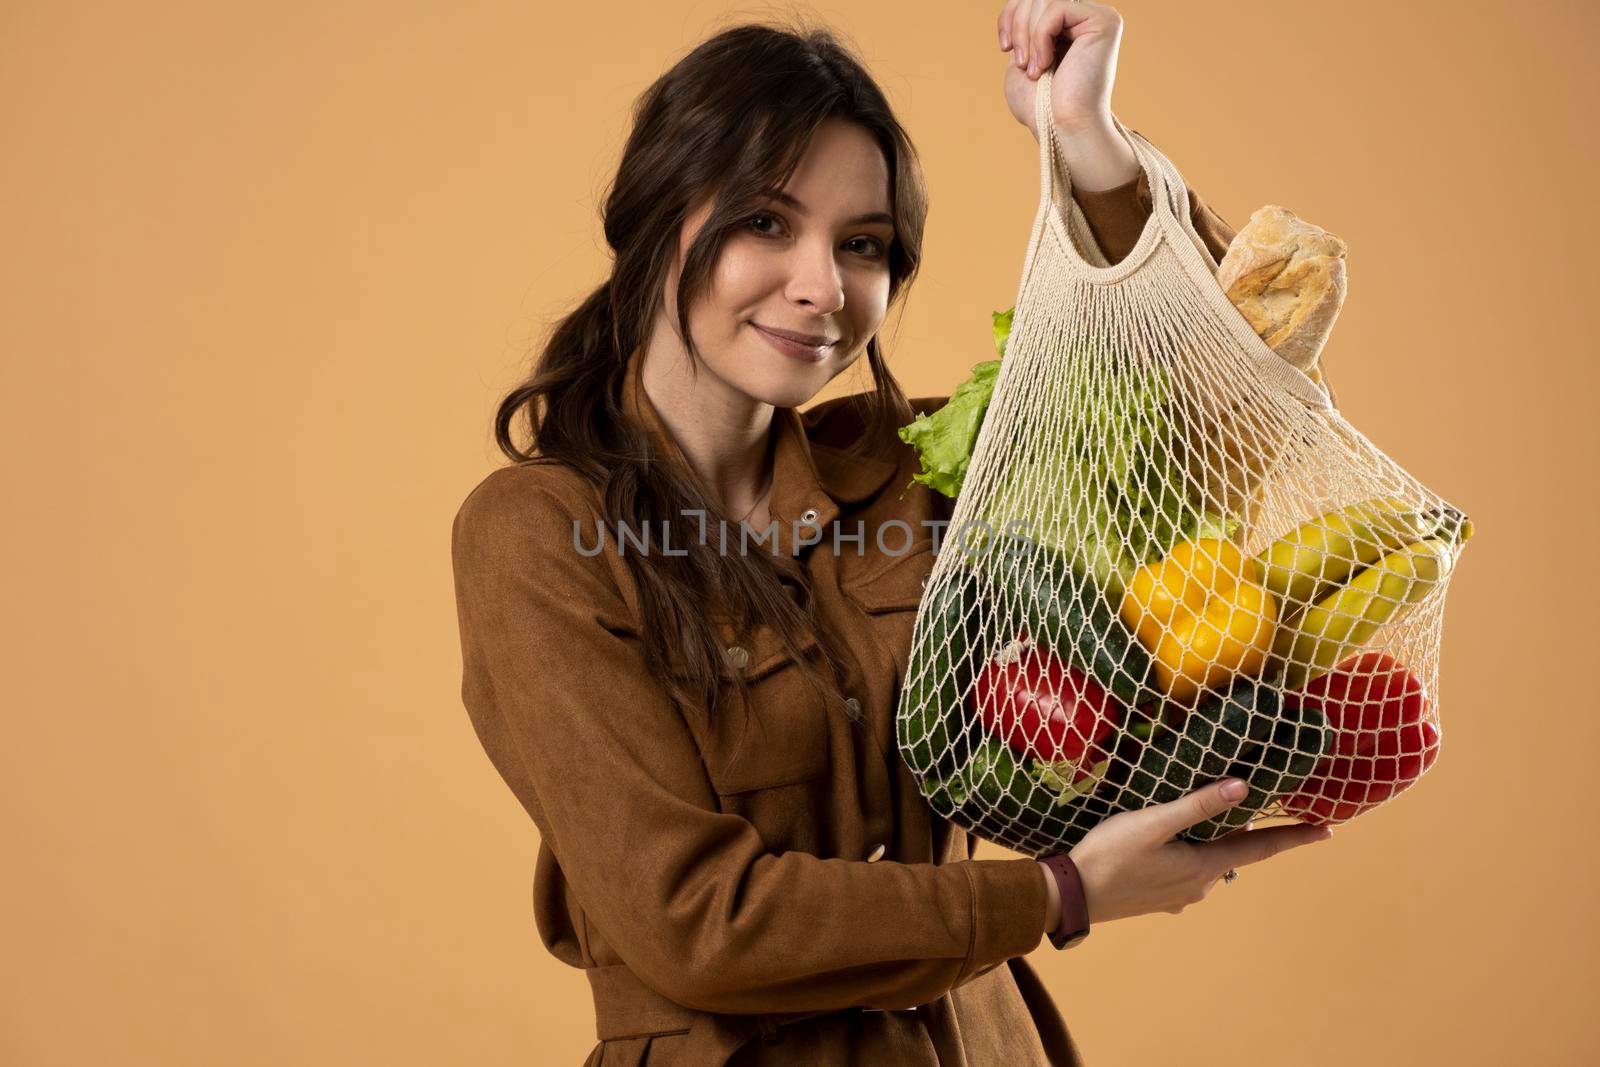 Portrait of happy smiling young woman in brown dress holding reusable string bag with groceries over orange background. Sustainability, eco living and people concept